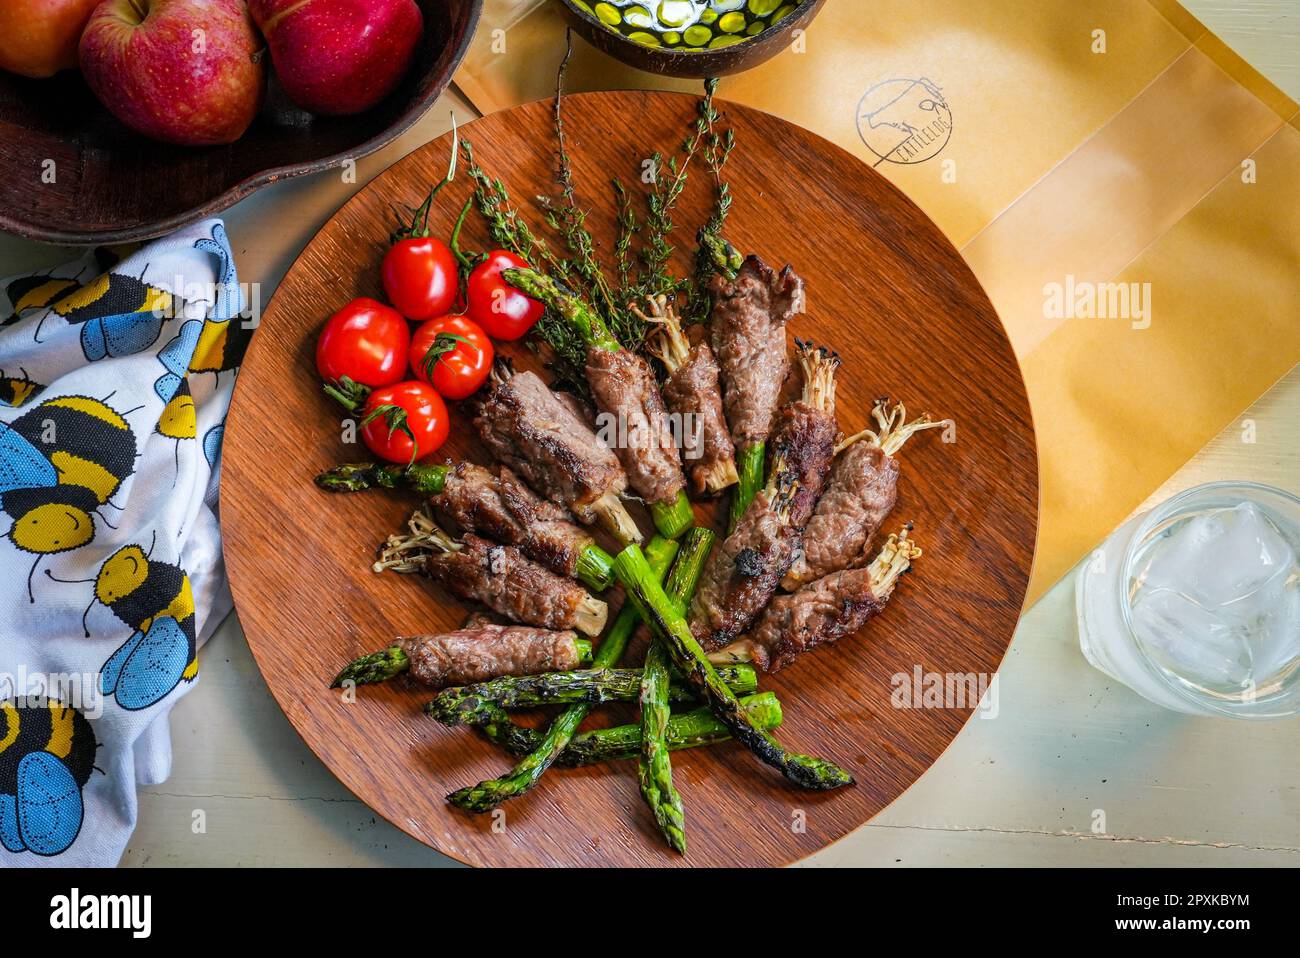 A rustic wooden plate filled with various fresh cooked meats and vegetables. Stock Photo